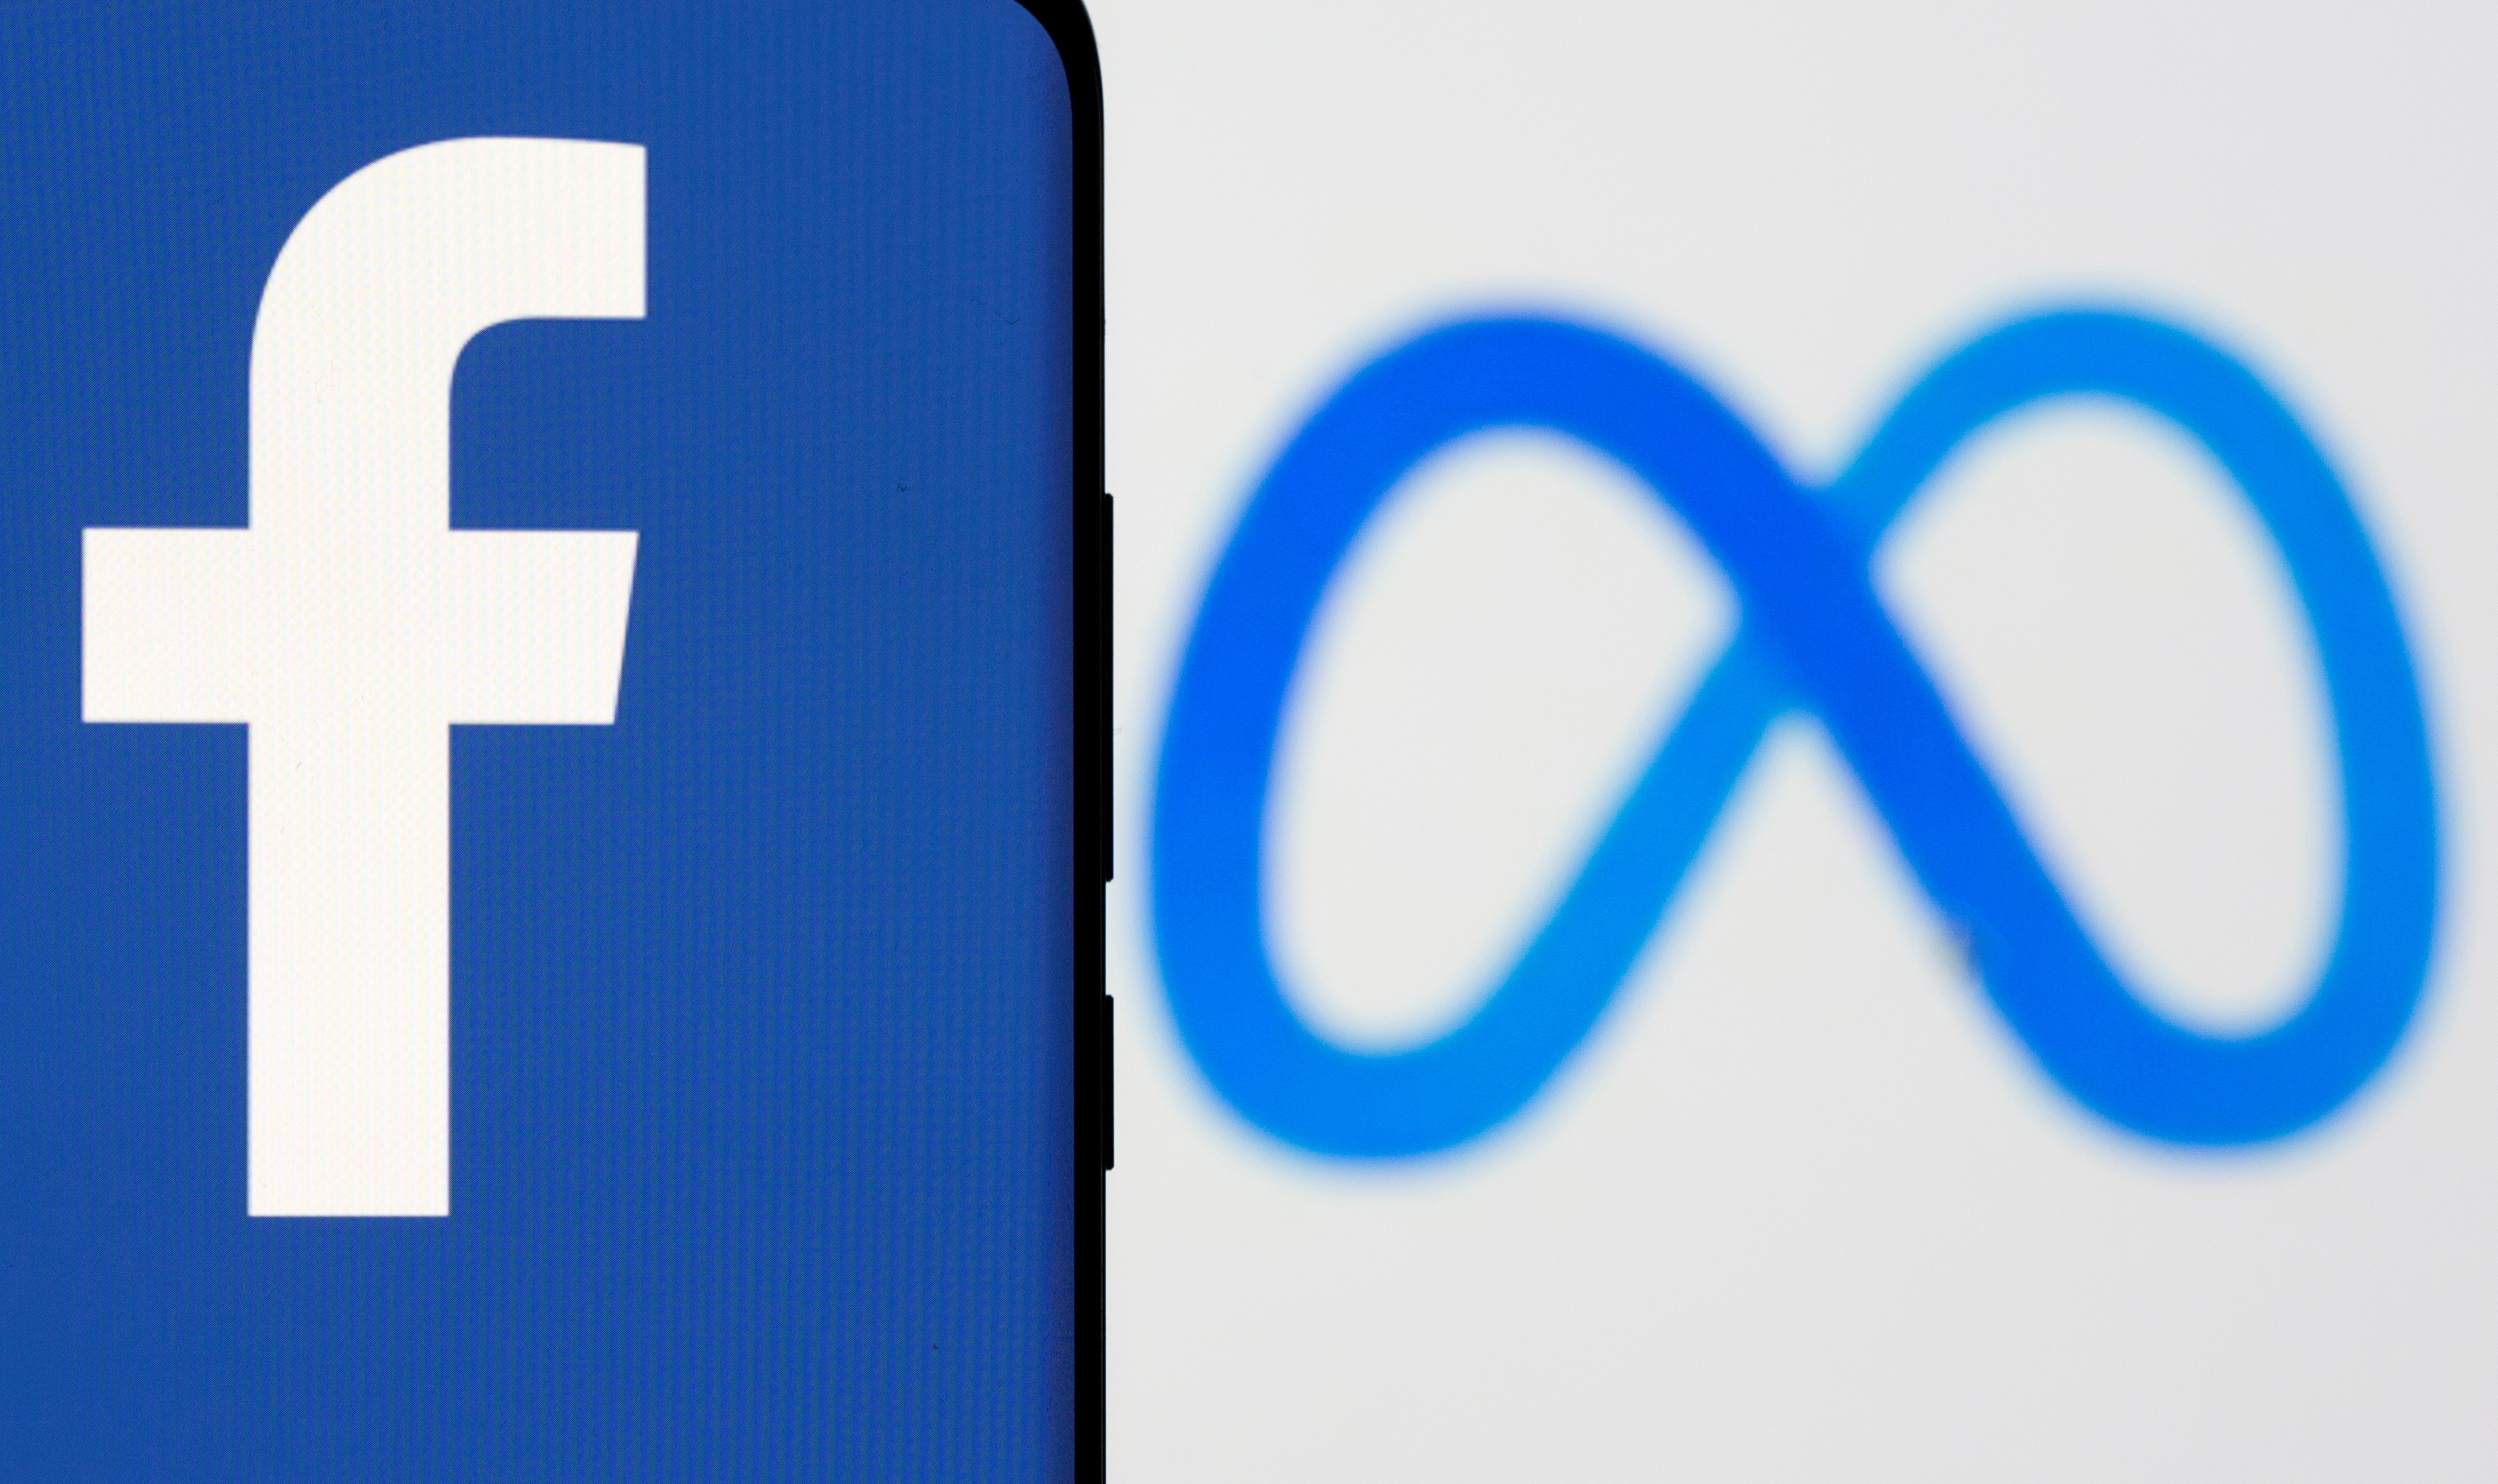 Facebook's new rebrand logo Meta is displayed behind a smartphone with the Facebook logo in this illustration picture taken October 28, 2021. REUTERS/Dado Ruvic/Illustration/File Photo